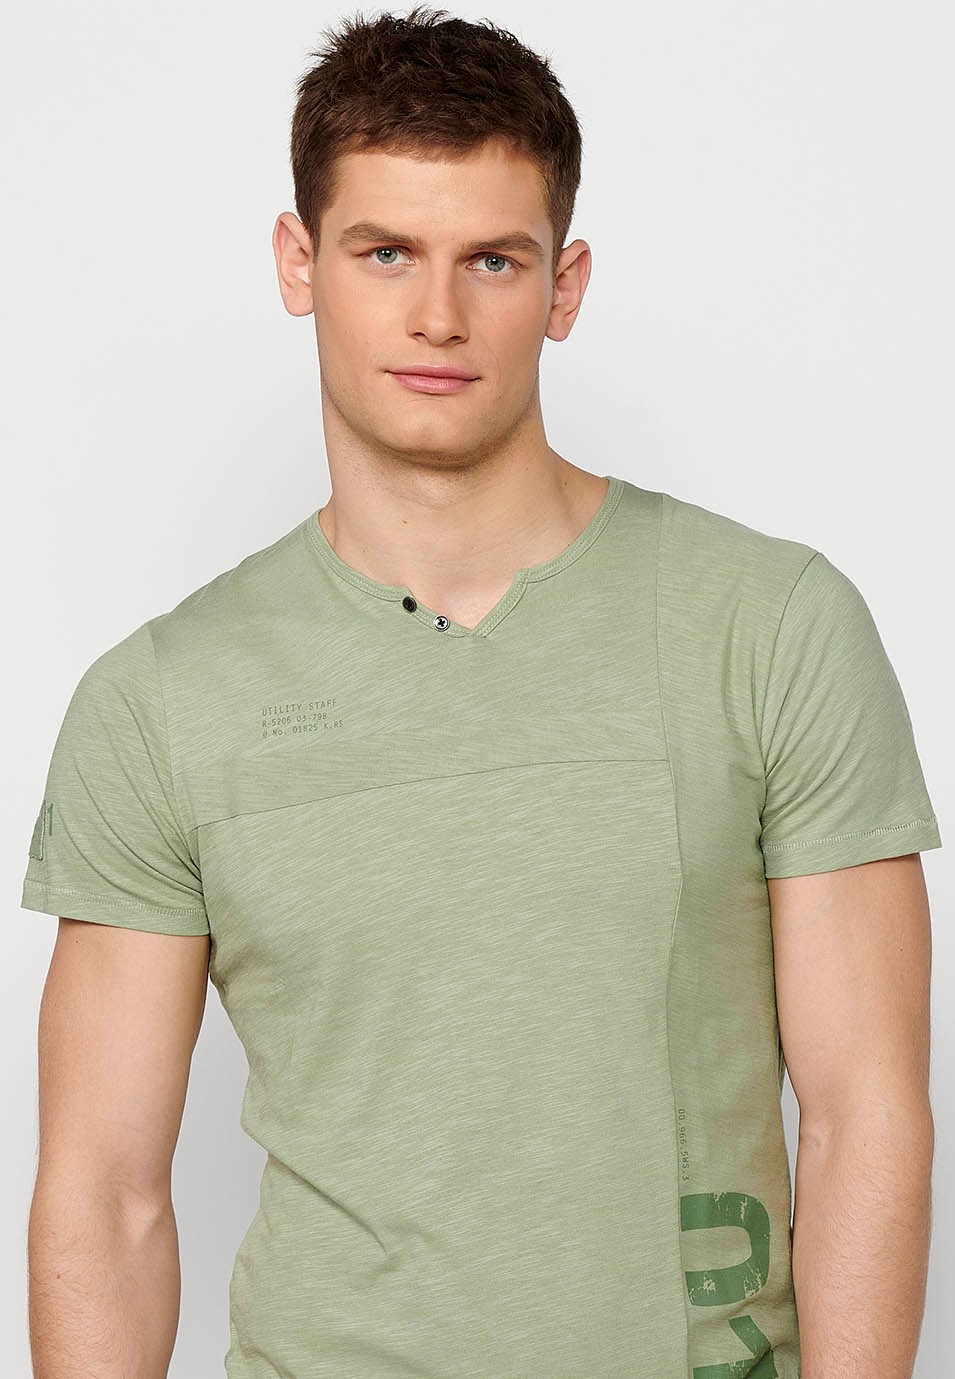  Men's kakhi short-sleeved cotton t-shirt, round neck with button opening